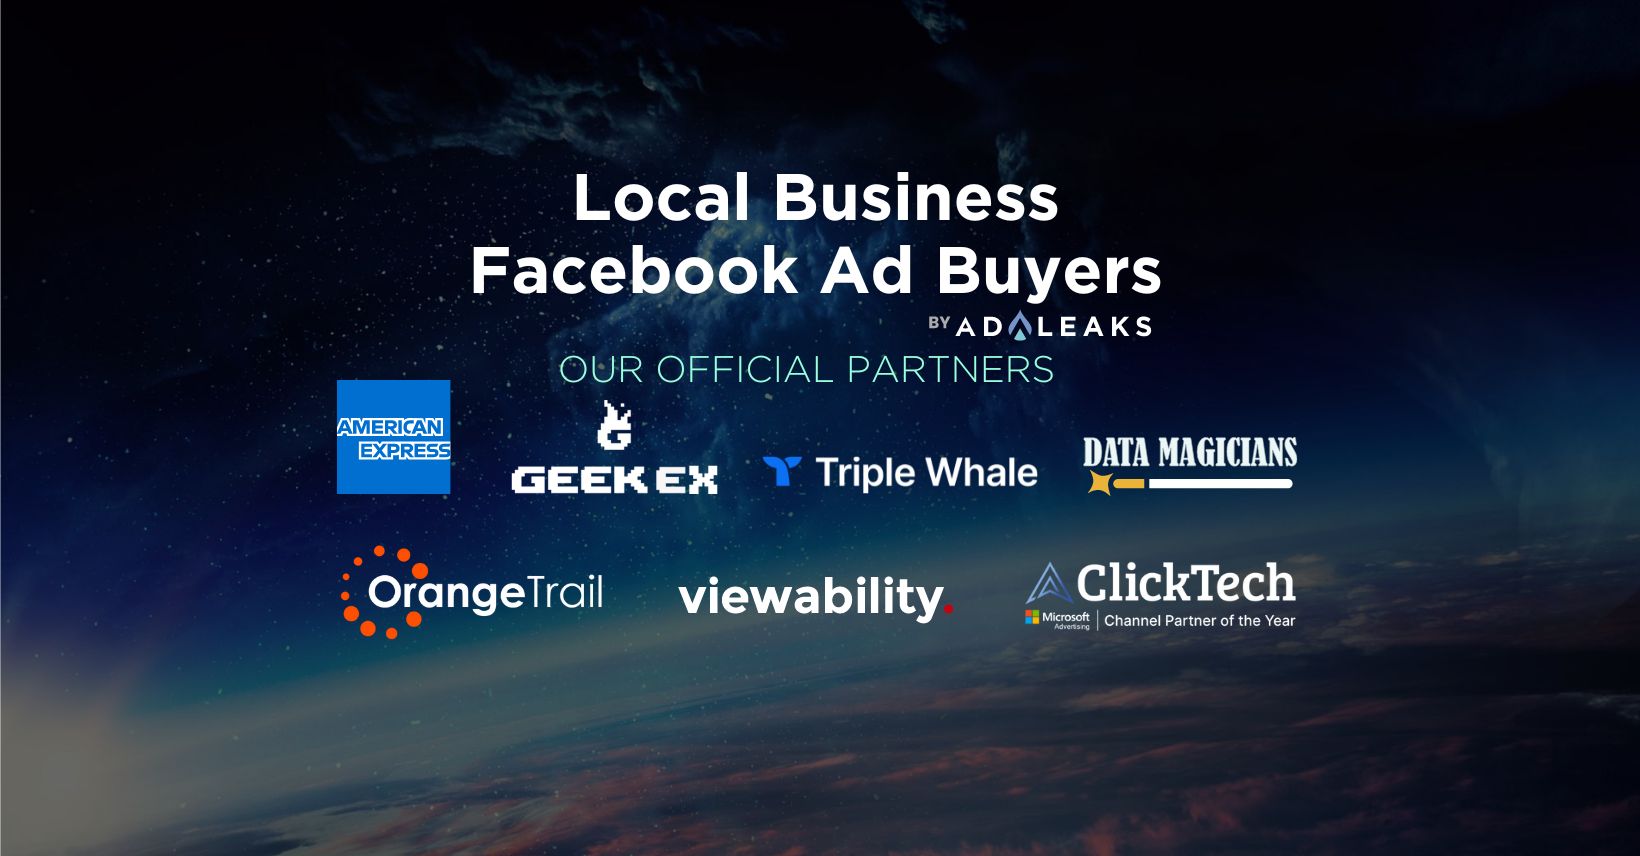 local business ad buyers facebook banner